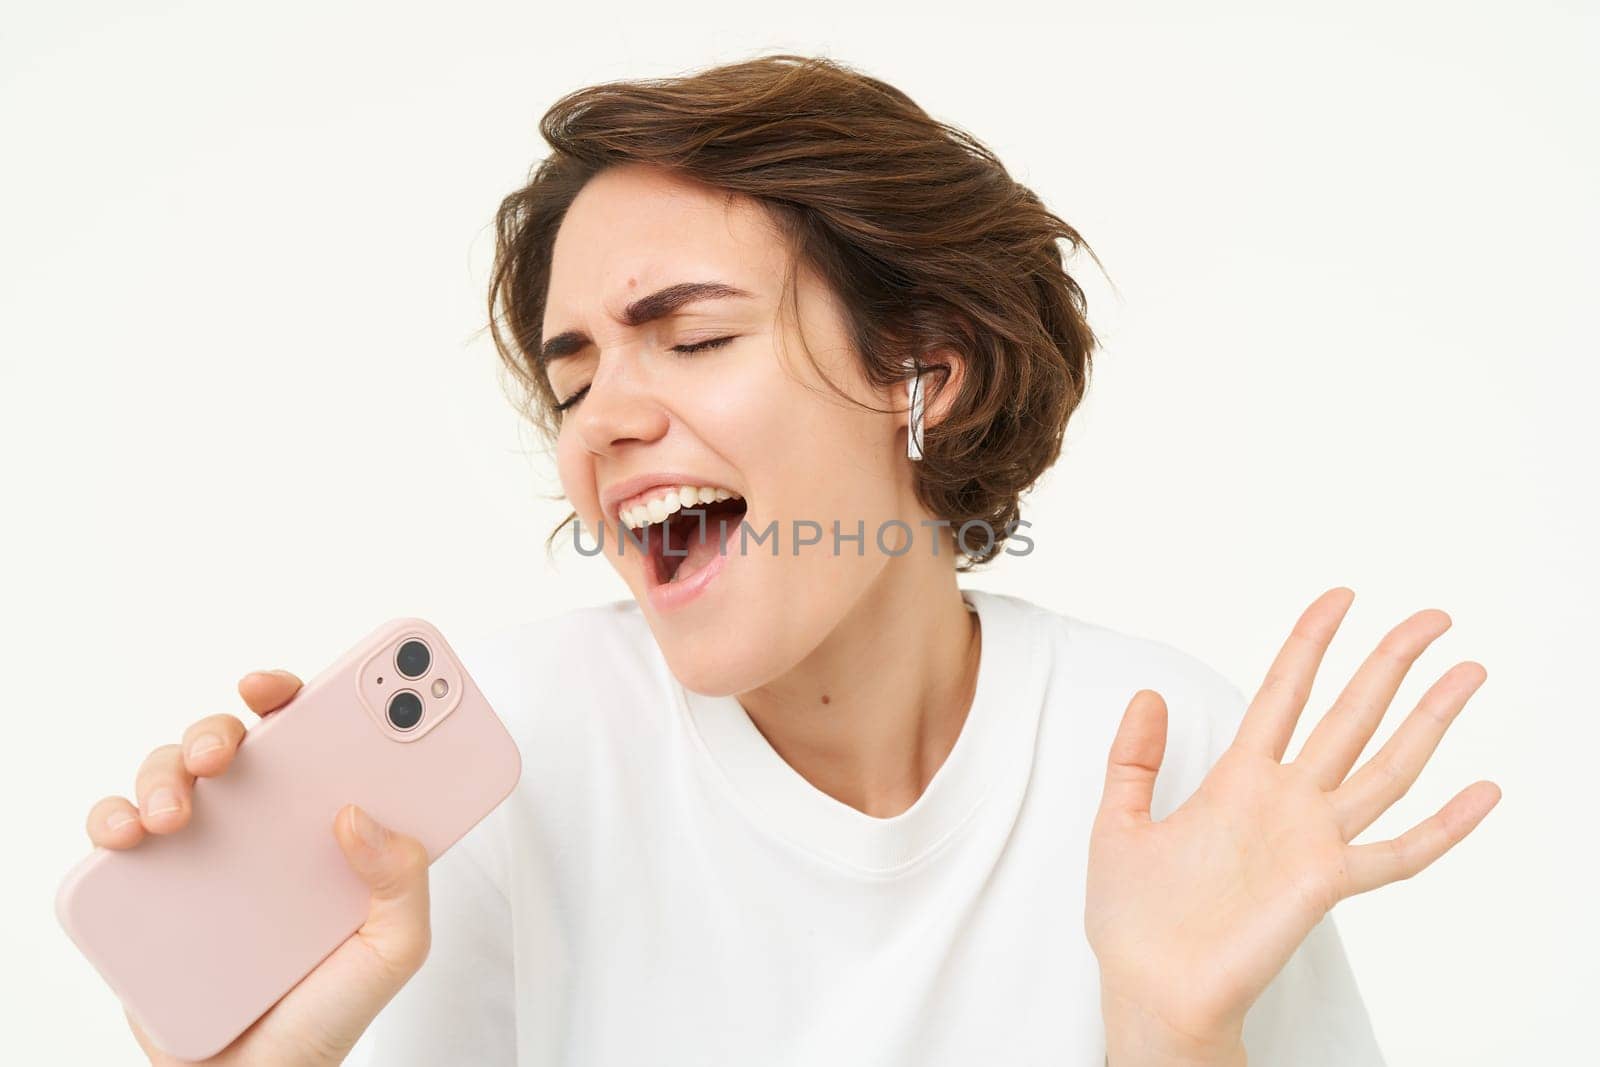 Woman singing along, listening music in wireless headphones, holding smartphone in hand, standing over white background.